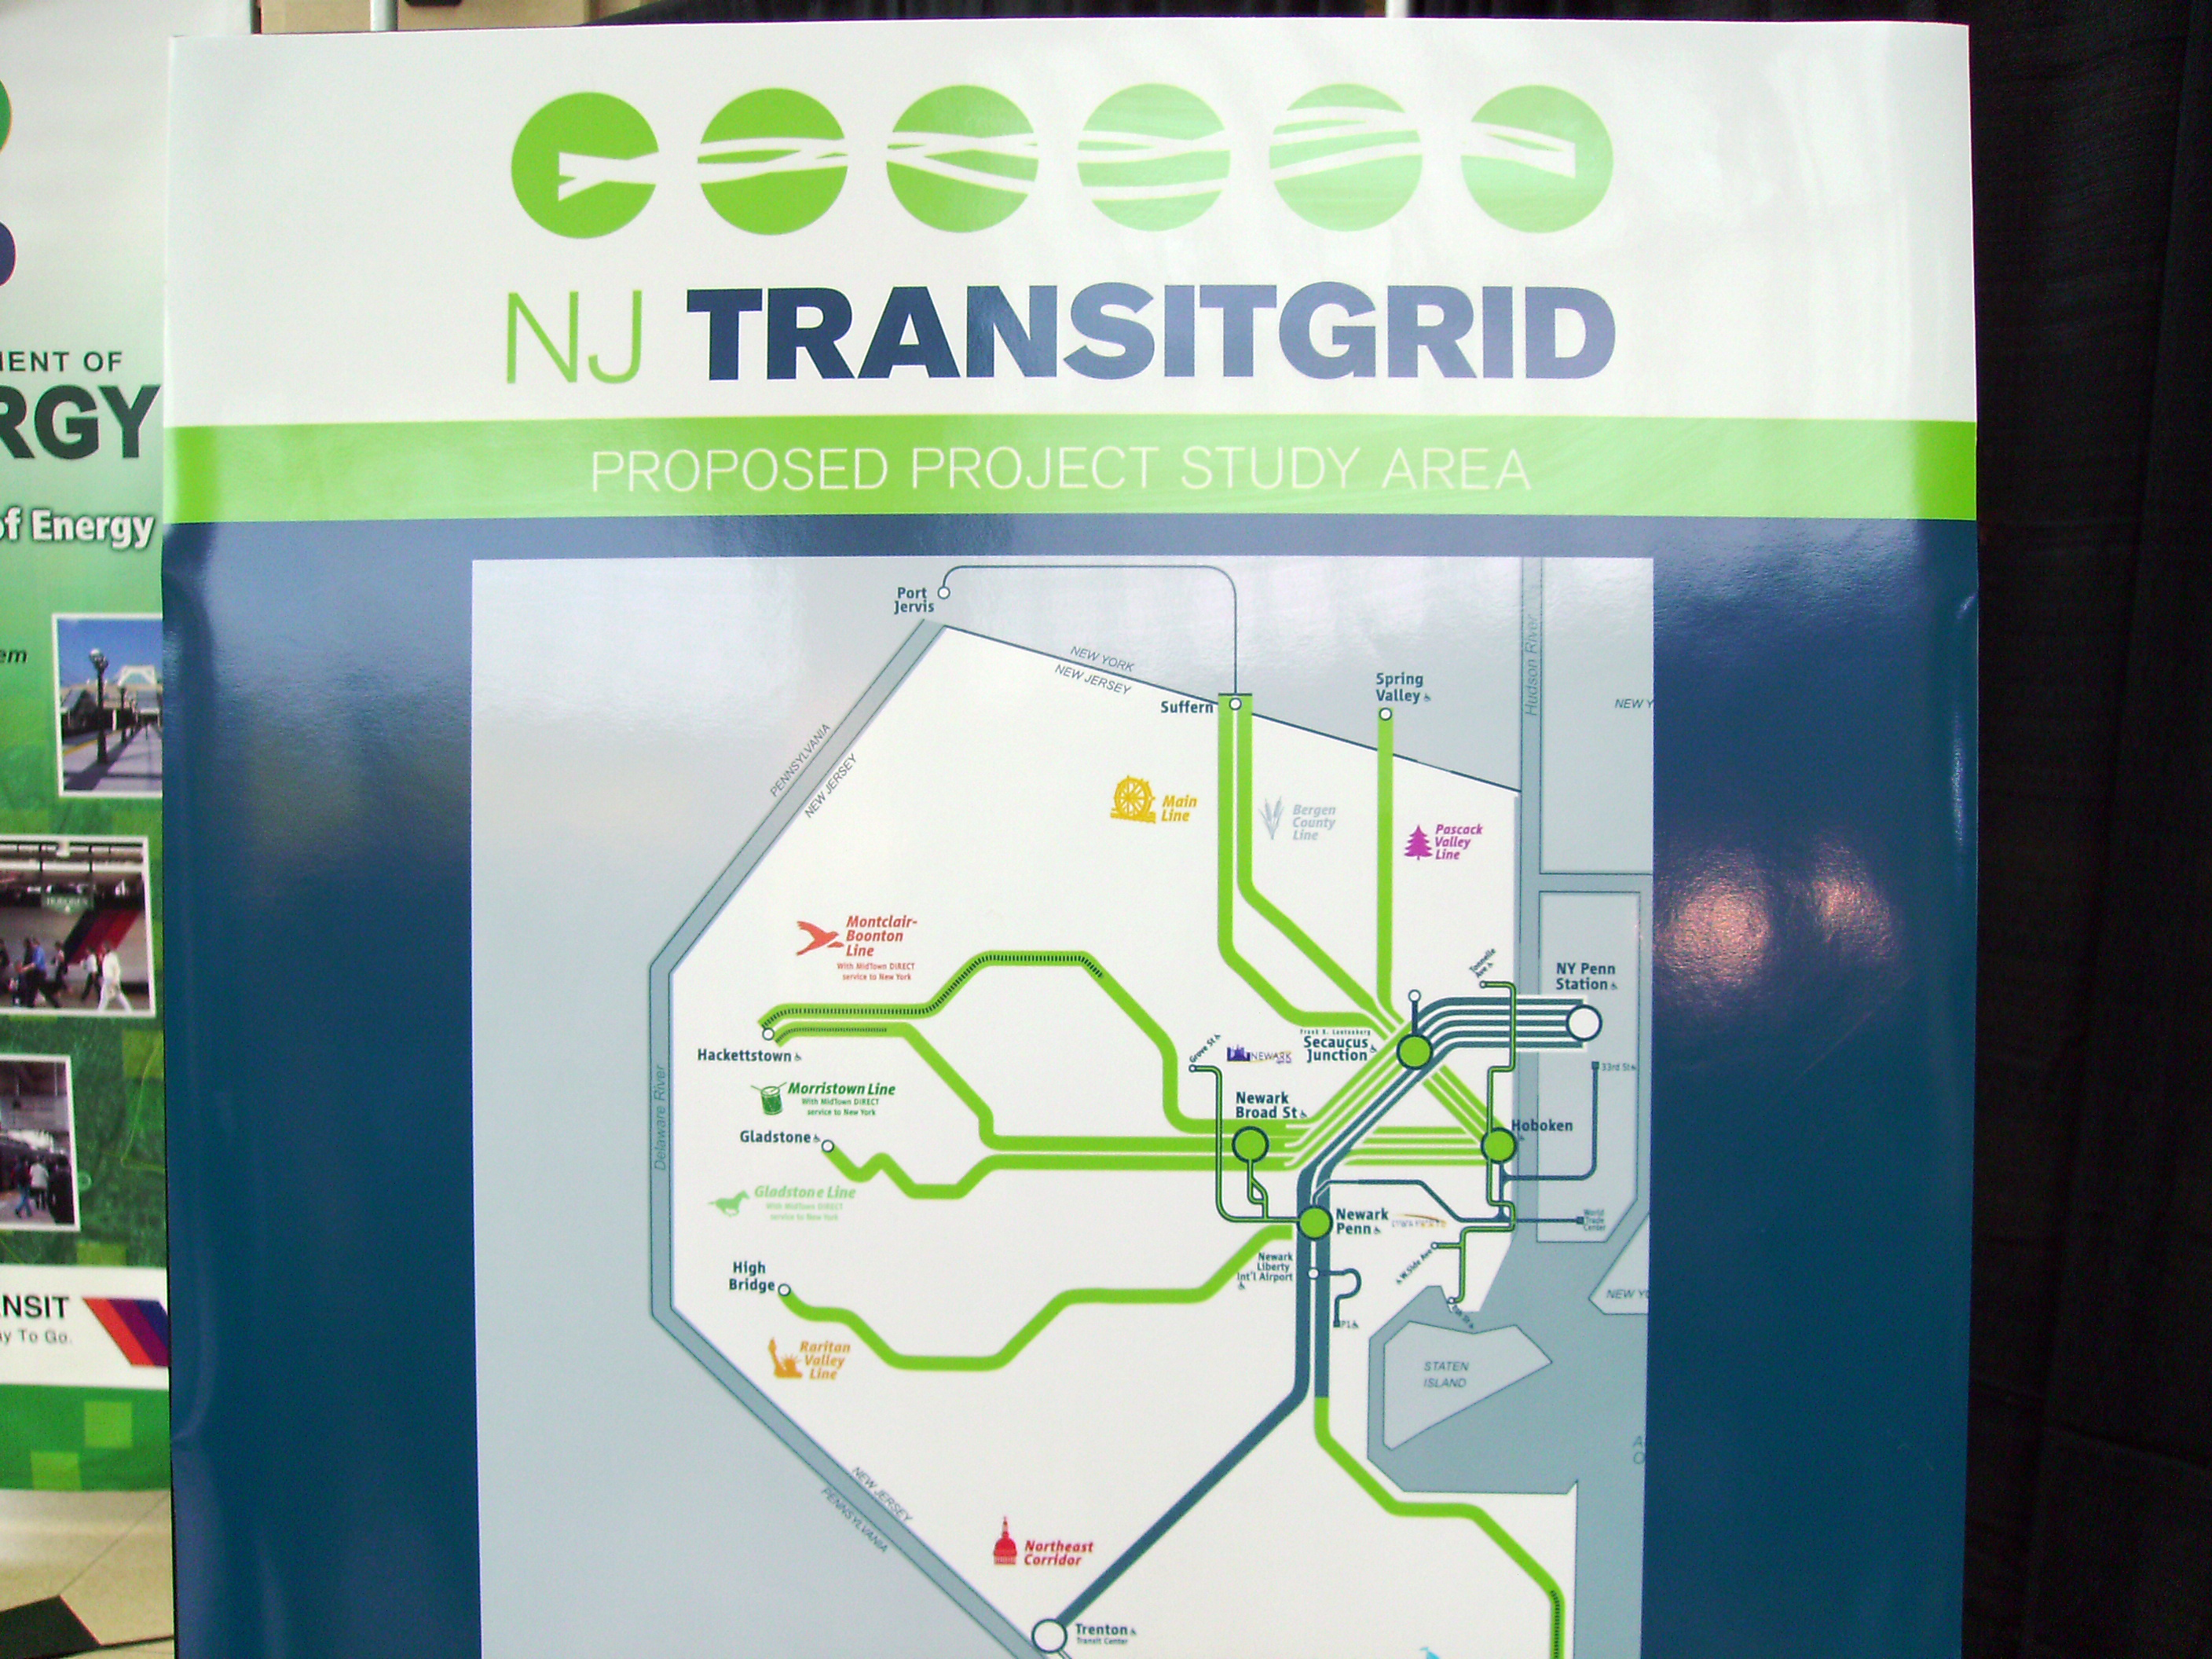 Proposed area for NJ TRANSIT microgrid study grant. (credit: Jim Smith/WCBS 880)